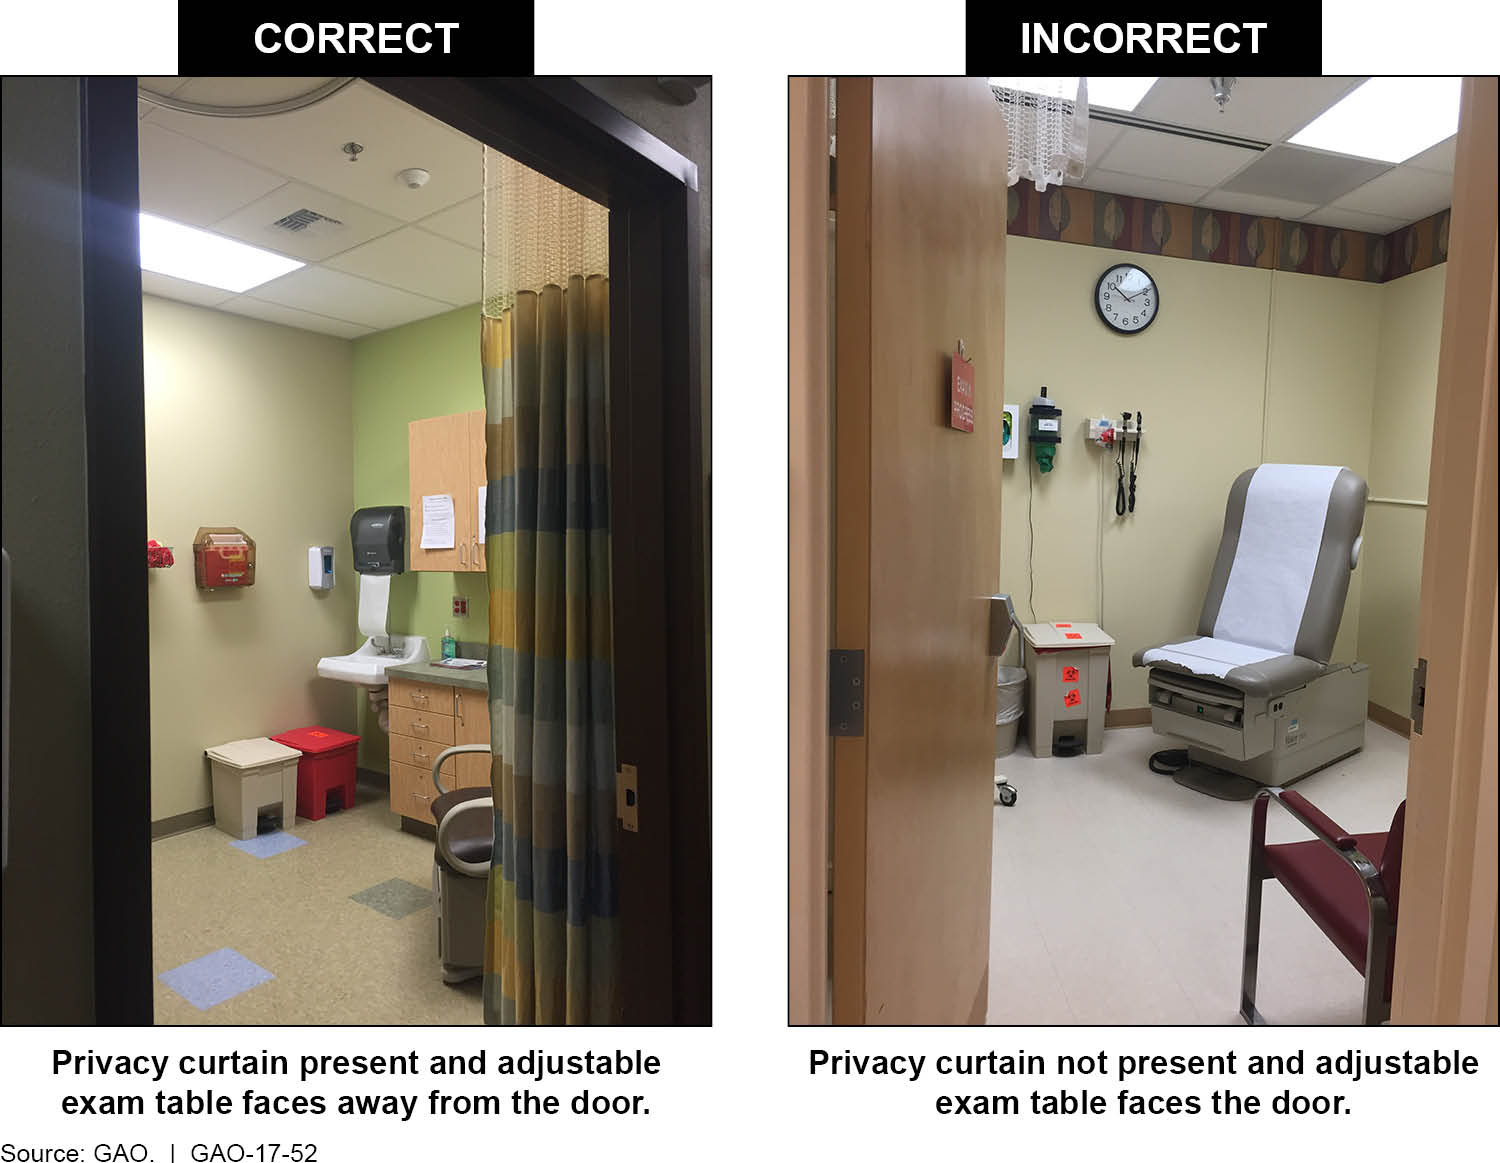 2 photos showing correct & incorrect use of privacy curtains and placement of exam table. 